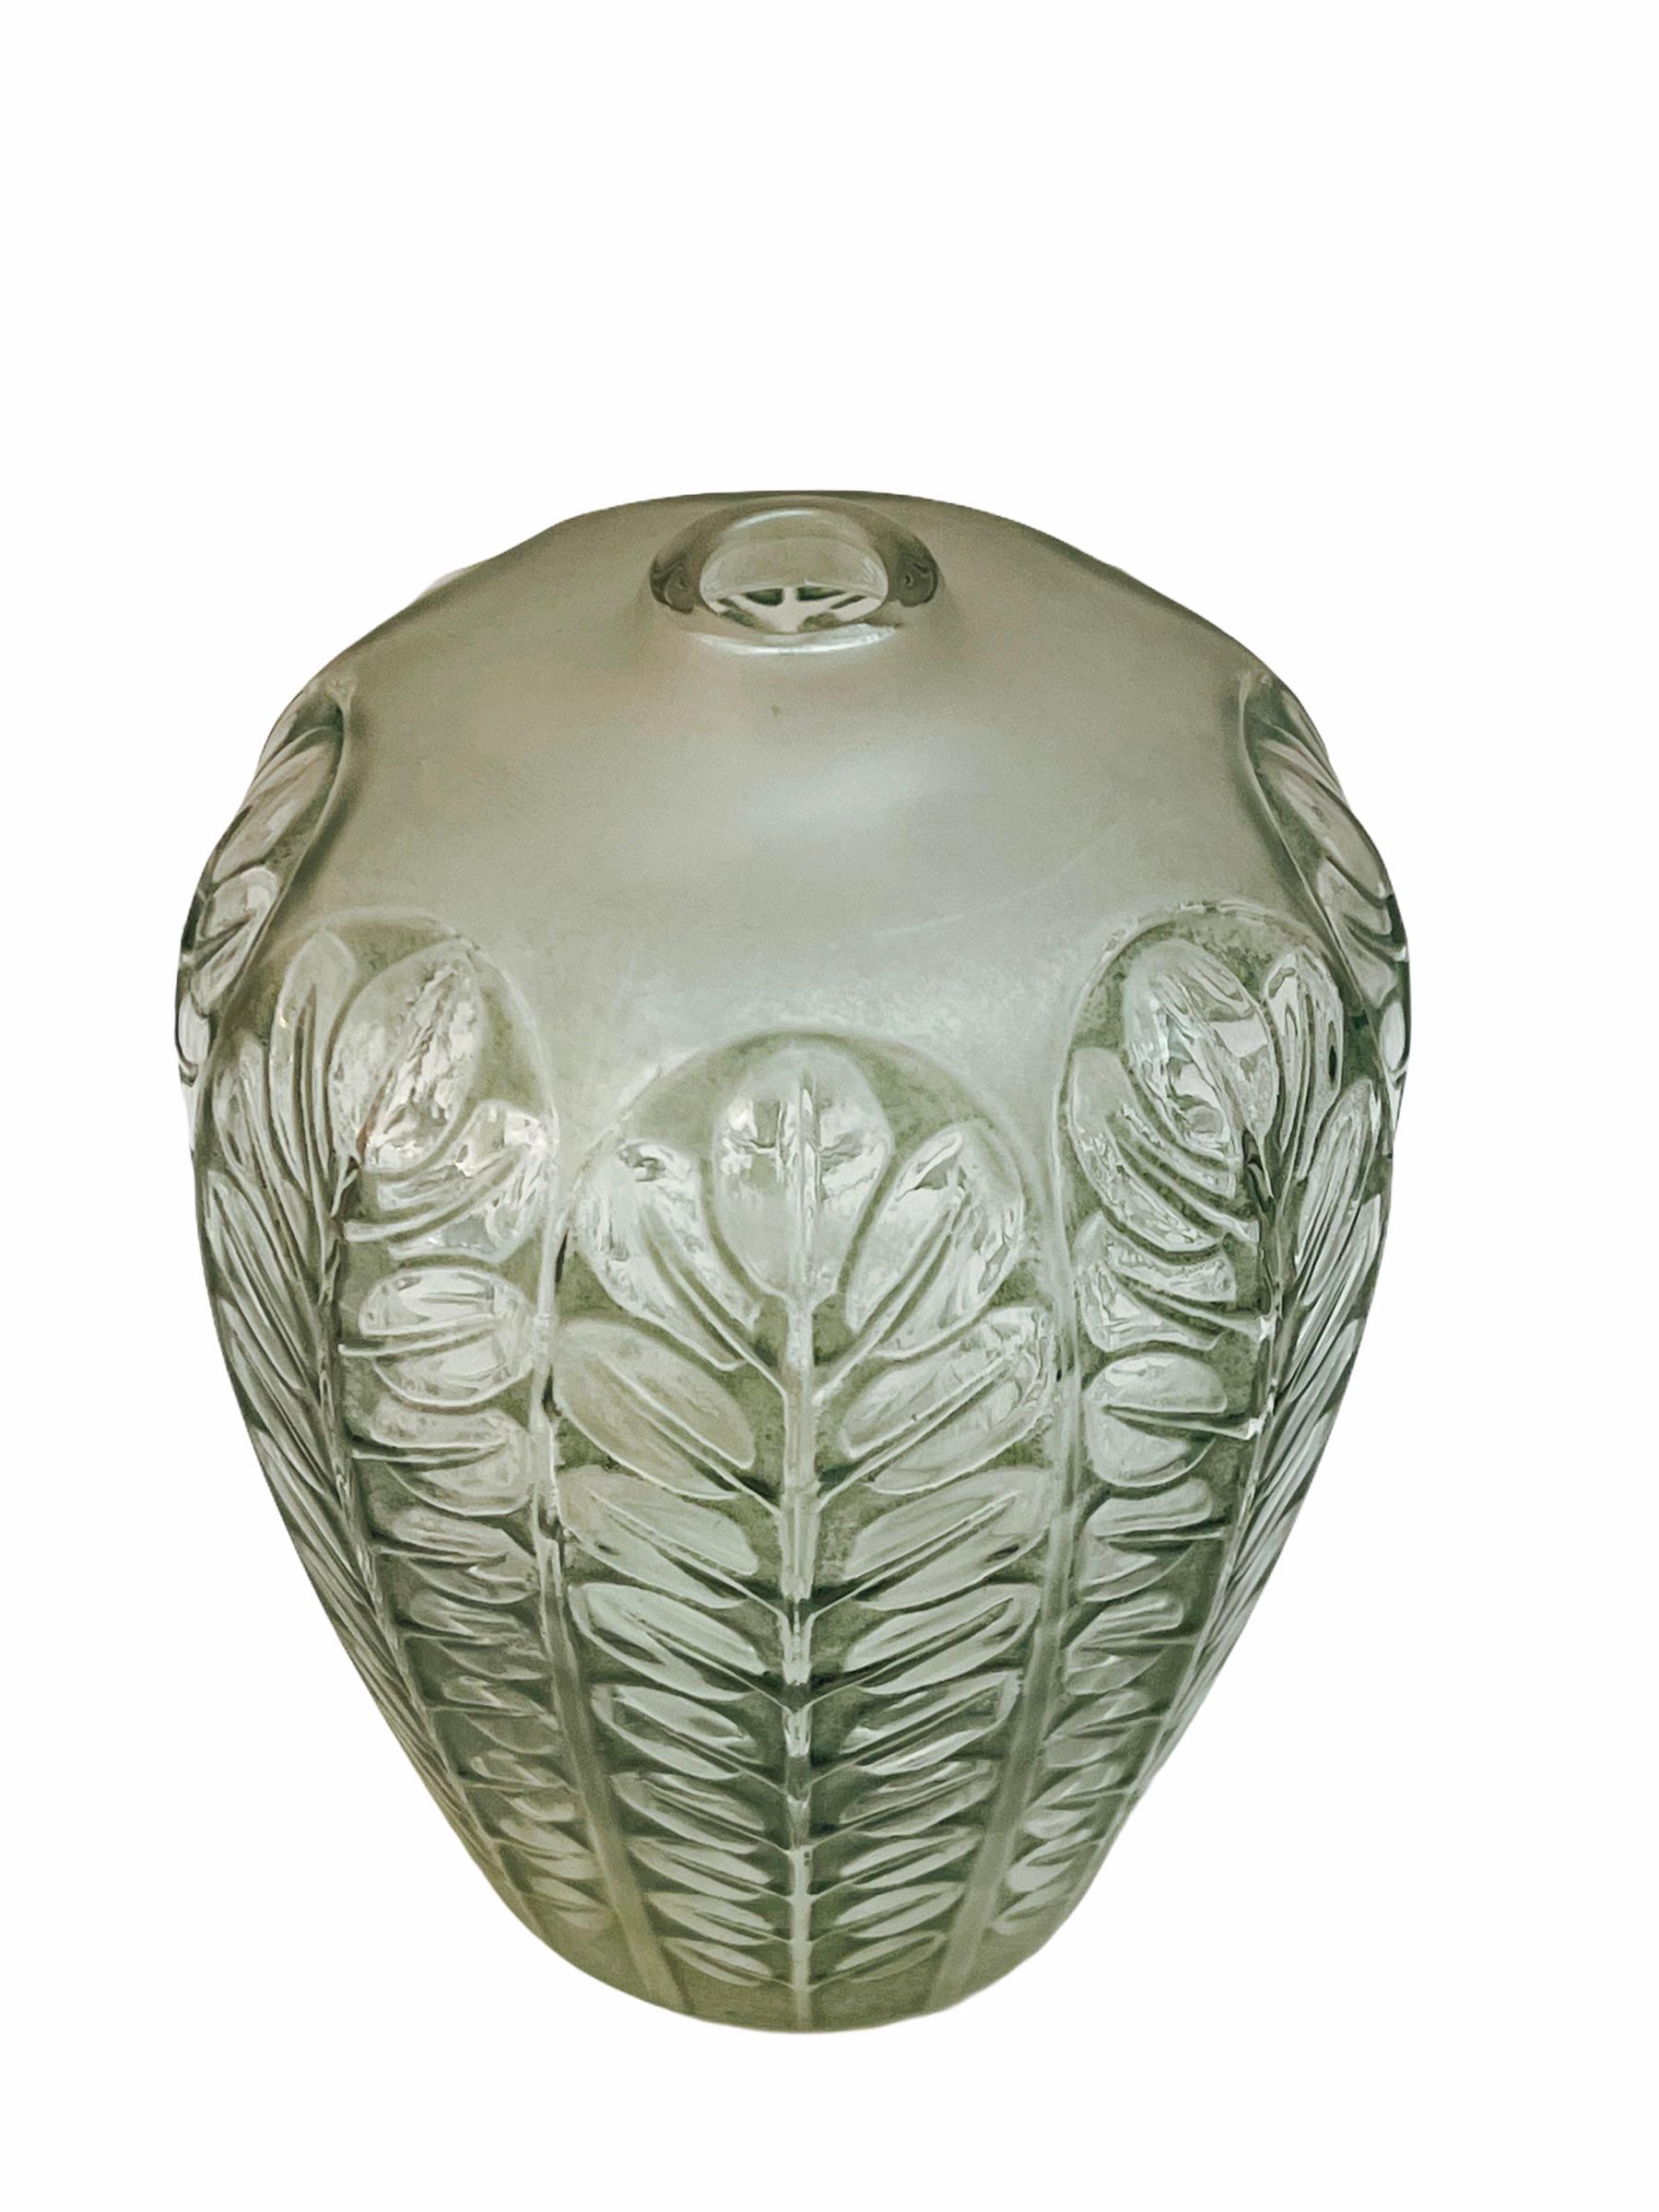 Art Deco 1924 René Lalique Tournai Vase in Frosted Glass with Green Patina